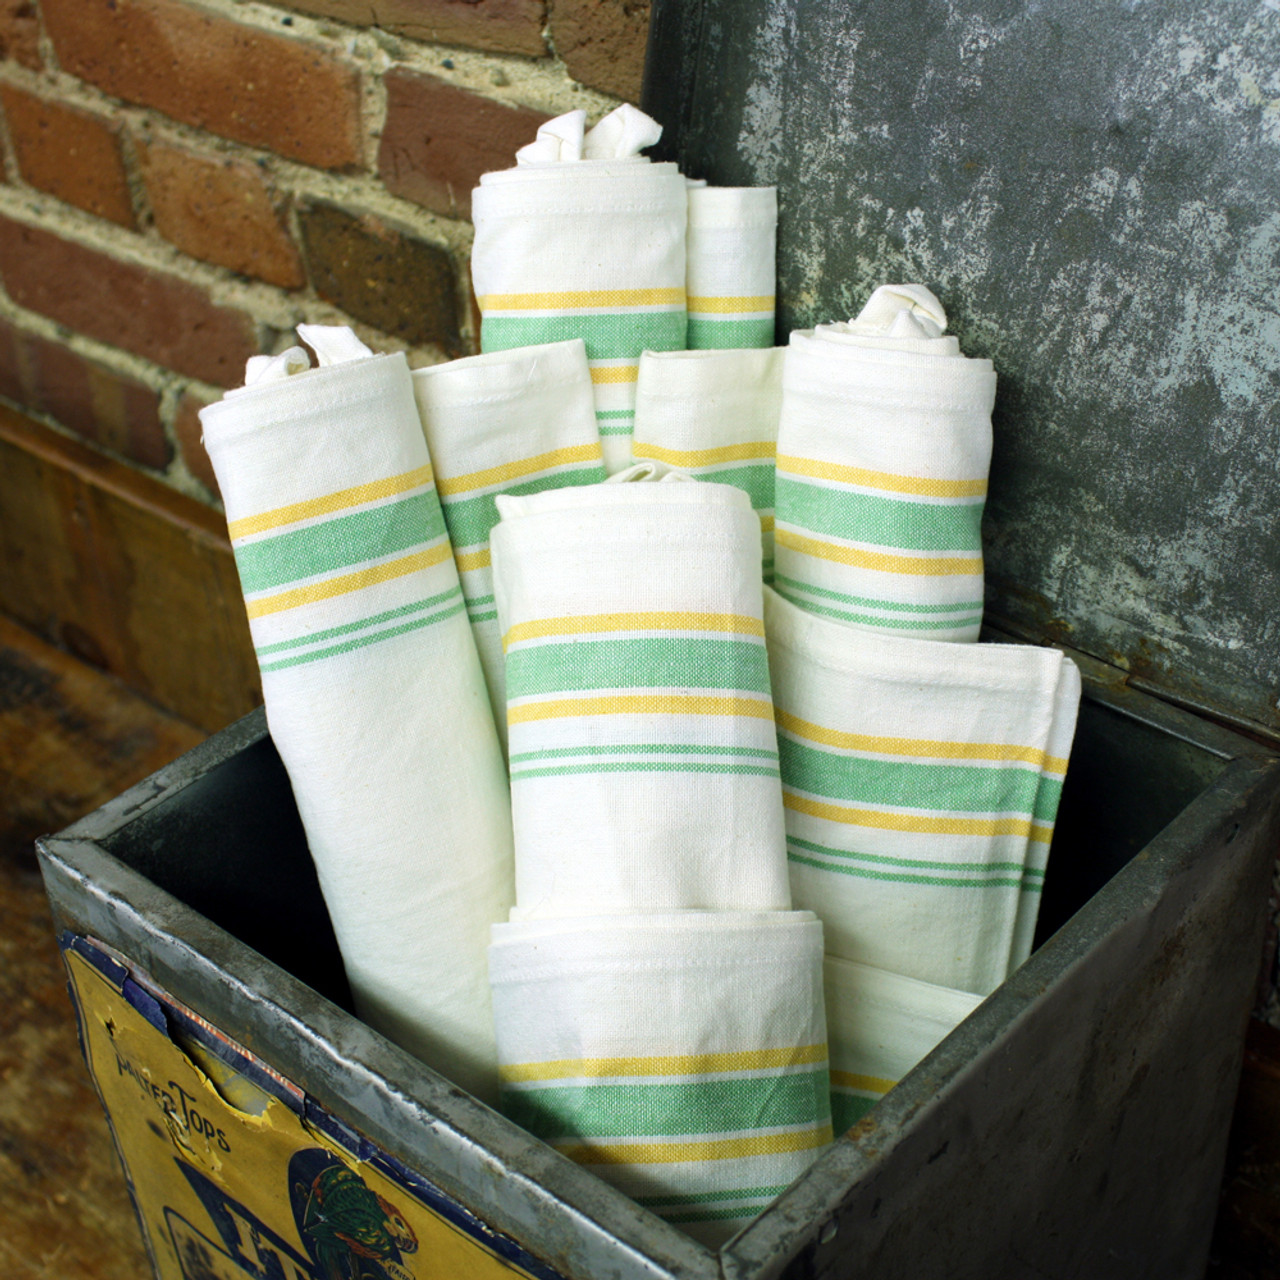 https://cdn11.bigcommerce.com/s-qlw1zct7w/images/stencil/1280x1280/products/2336/10158/Aunt_Marthas_Vintage_Green_Yellow_Stripe_Towels_1000px__33748.1491599708.jpg?c=2?imbypass=on